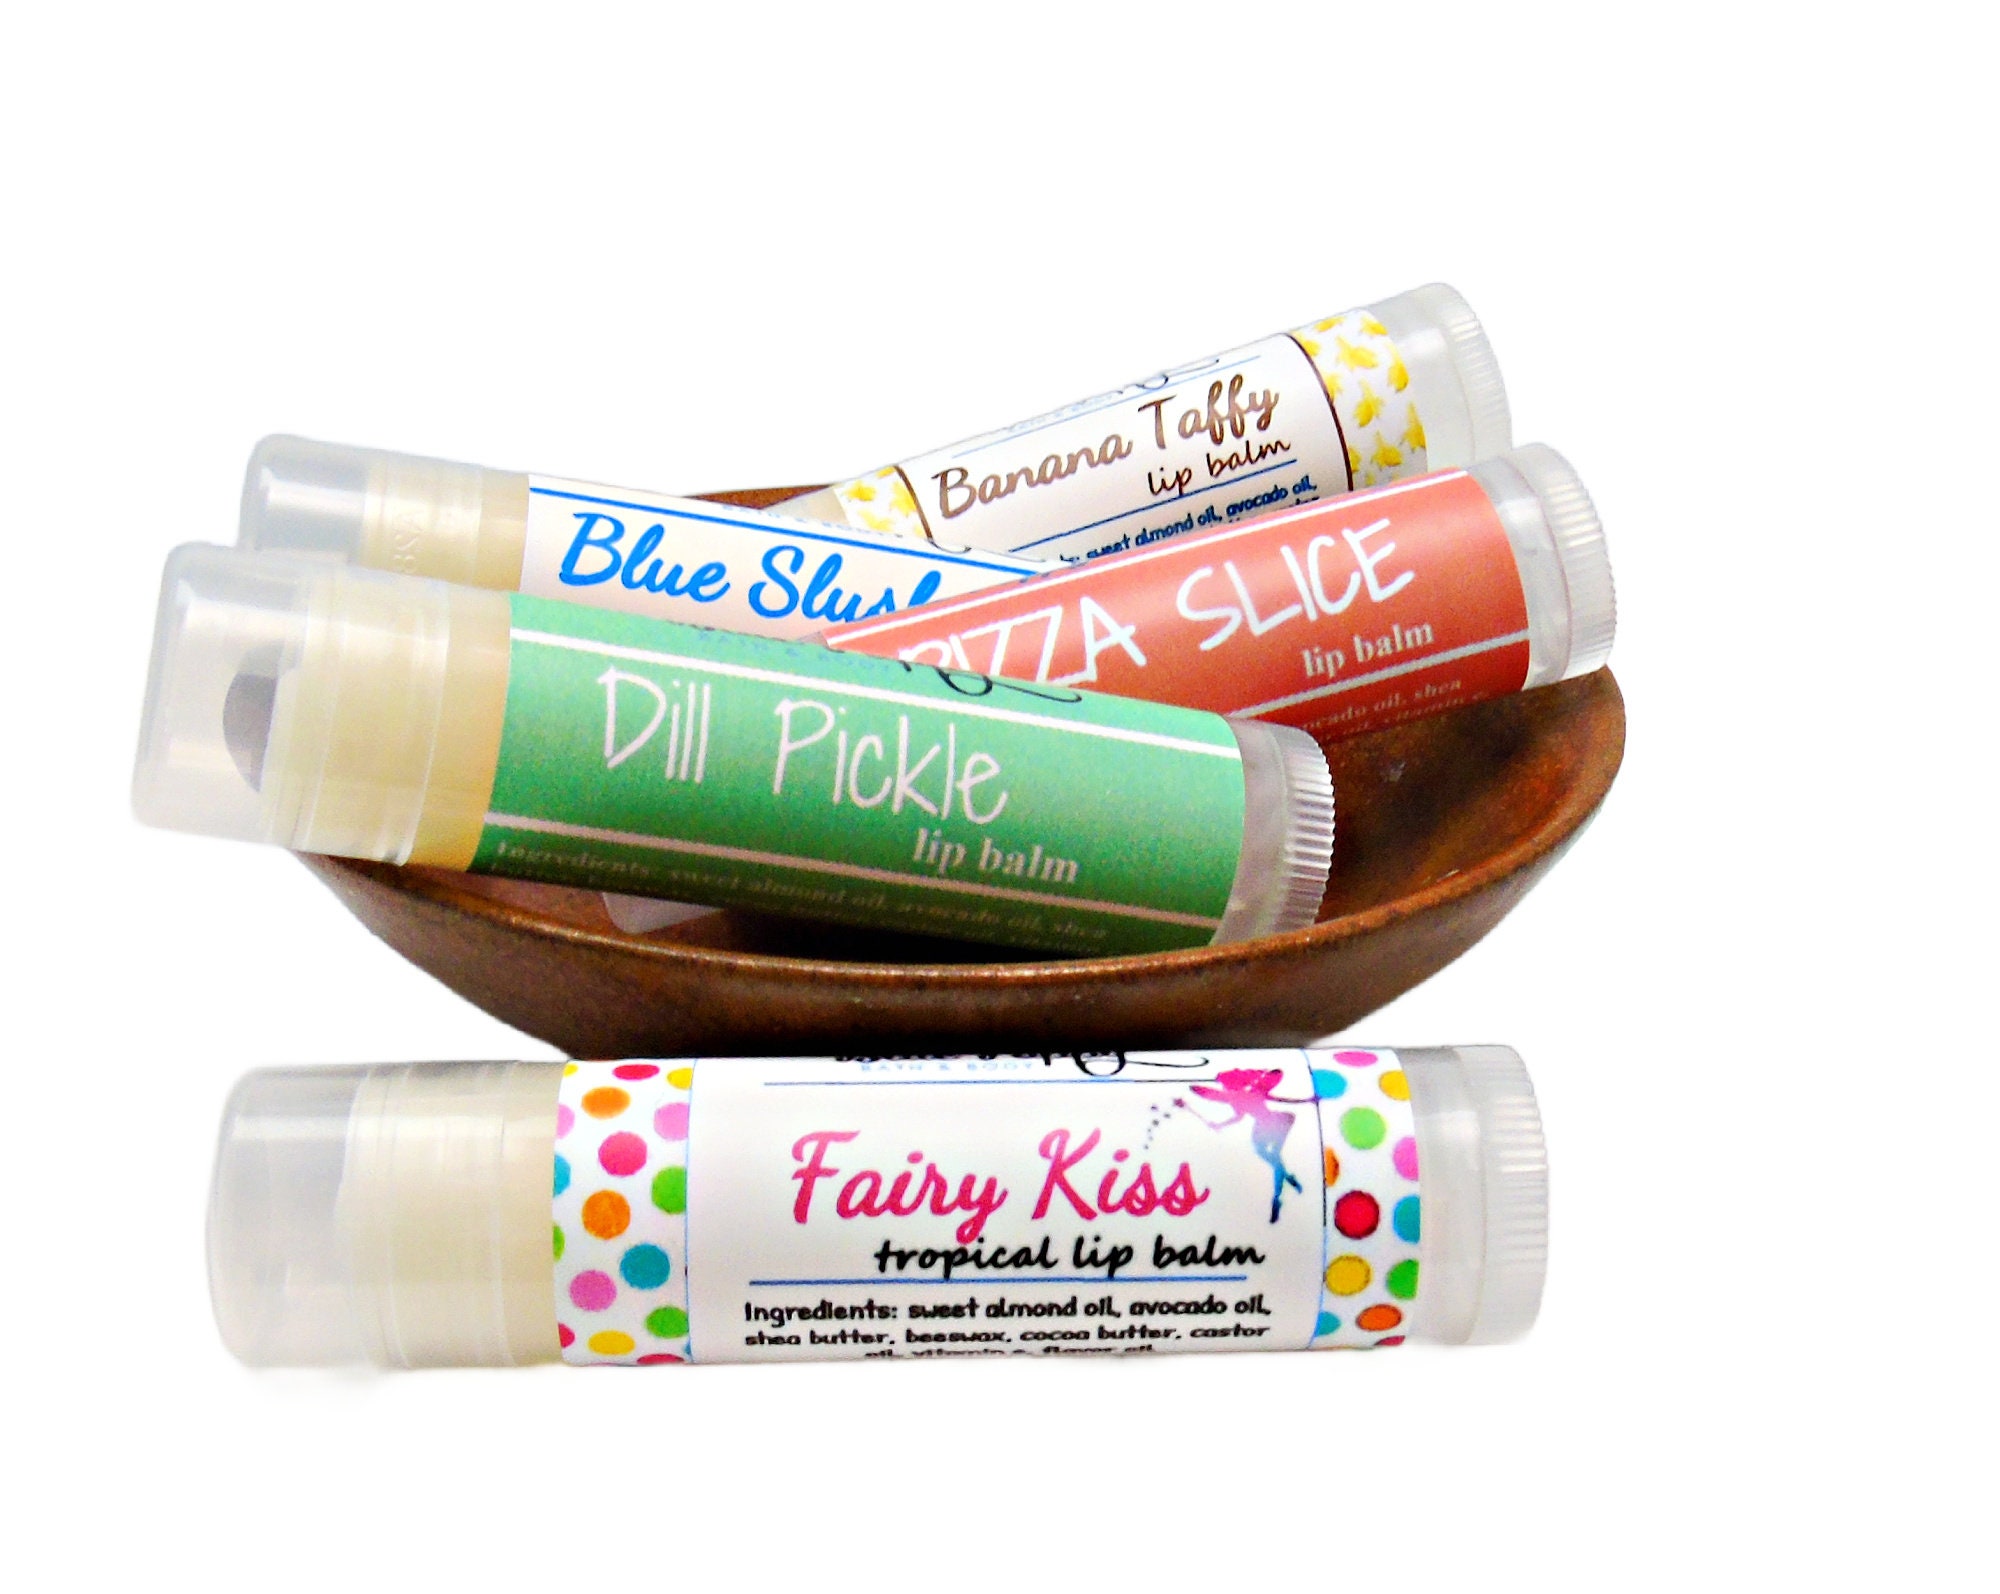 Vegan Lip Balm by Earth’s Daughter, Beeswax Free Lip Balm, Natural, Organic Flavors - 4 Pack of Assorted Flavors, Plant Based Vegan Chapstick, Lip